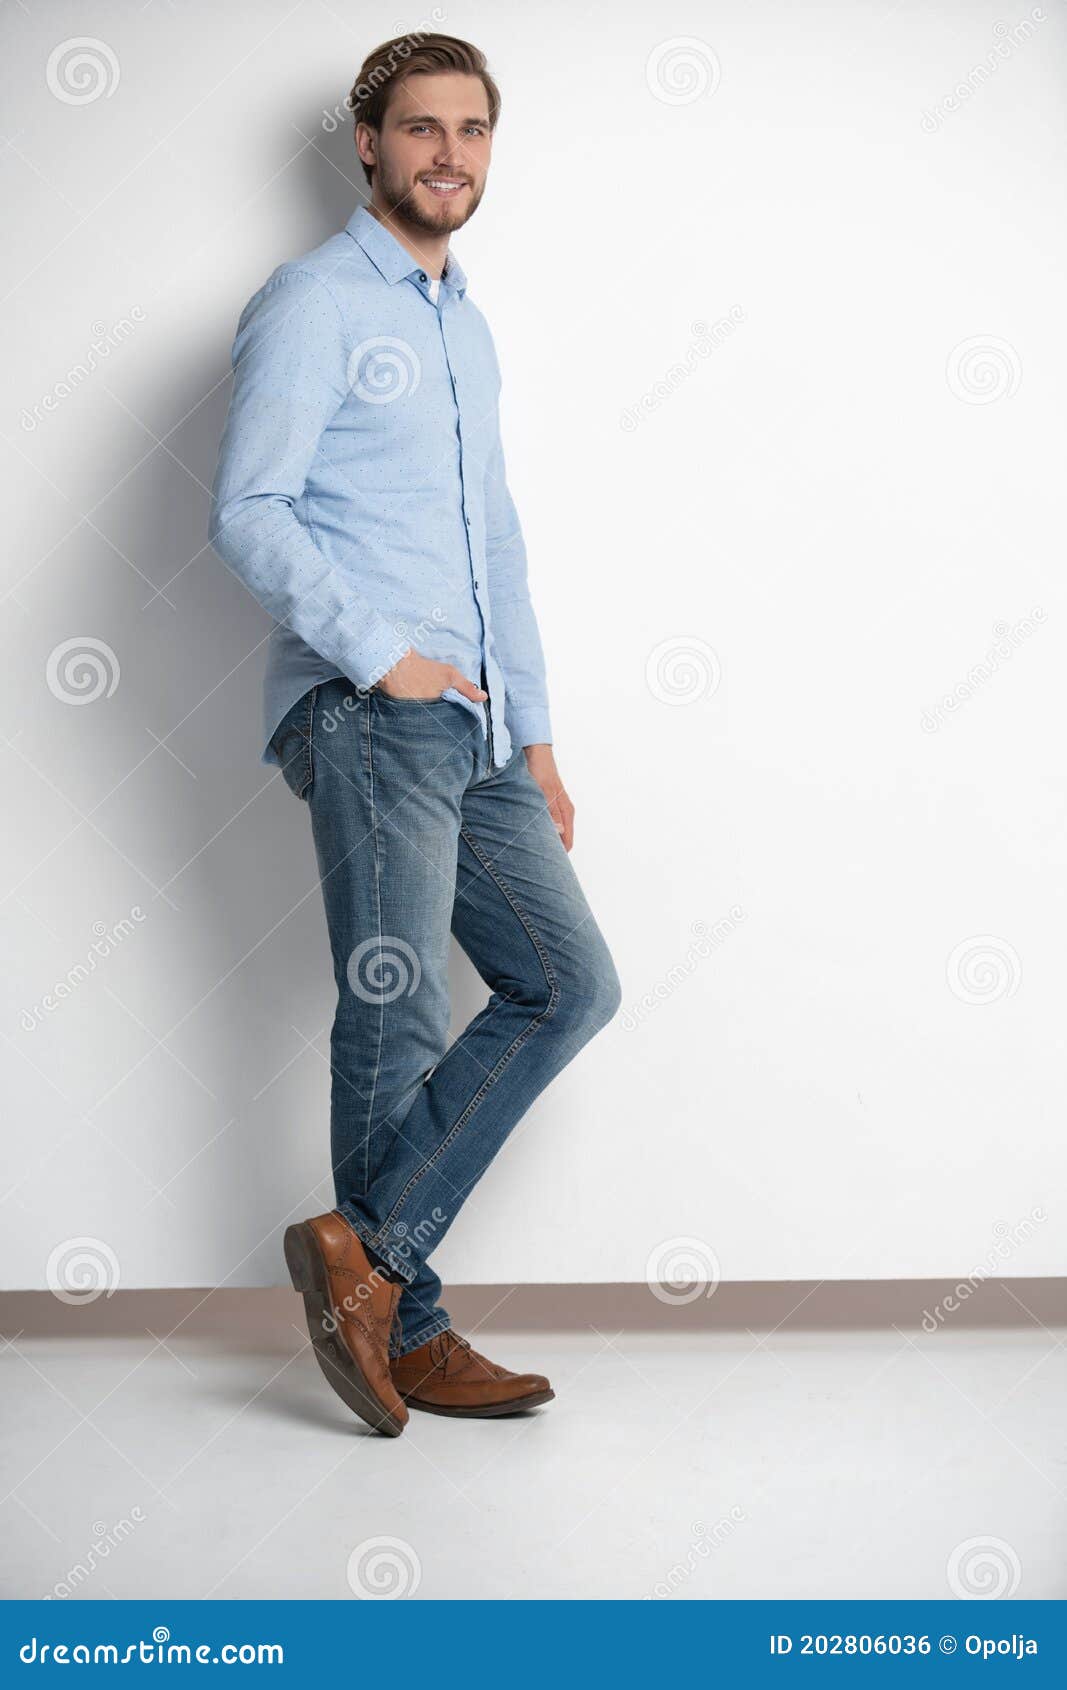 full length studio portrait of casual young man in jeans and shirt.  on white background.